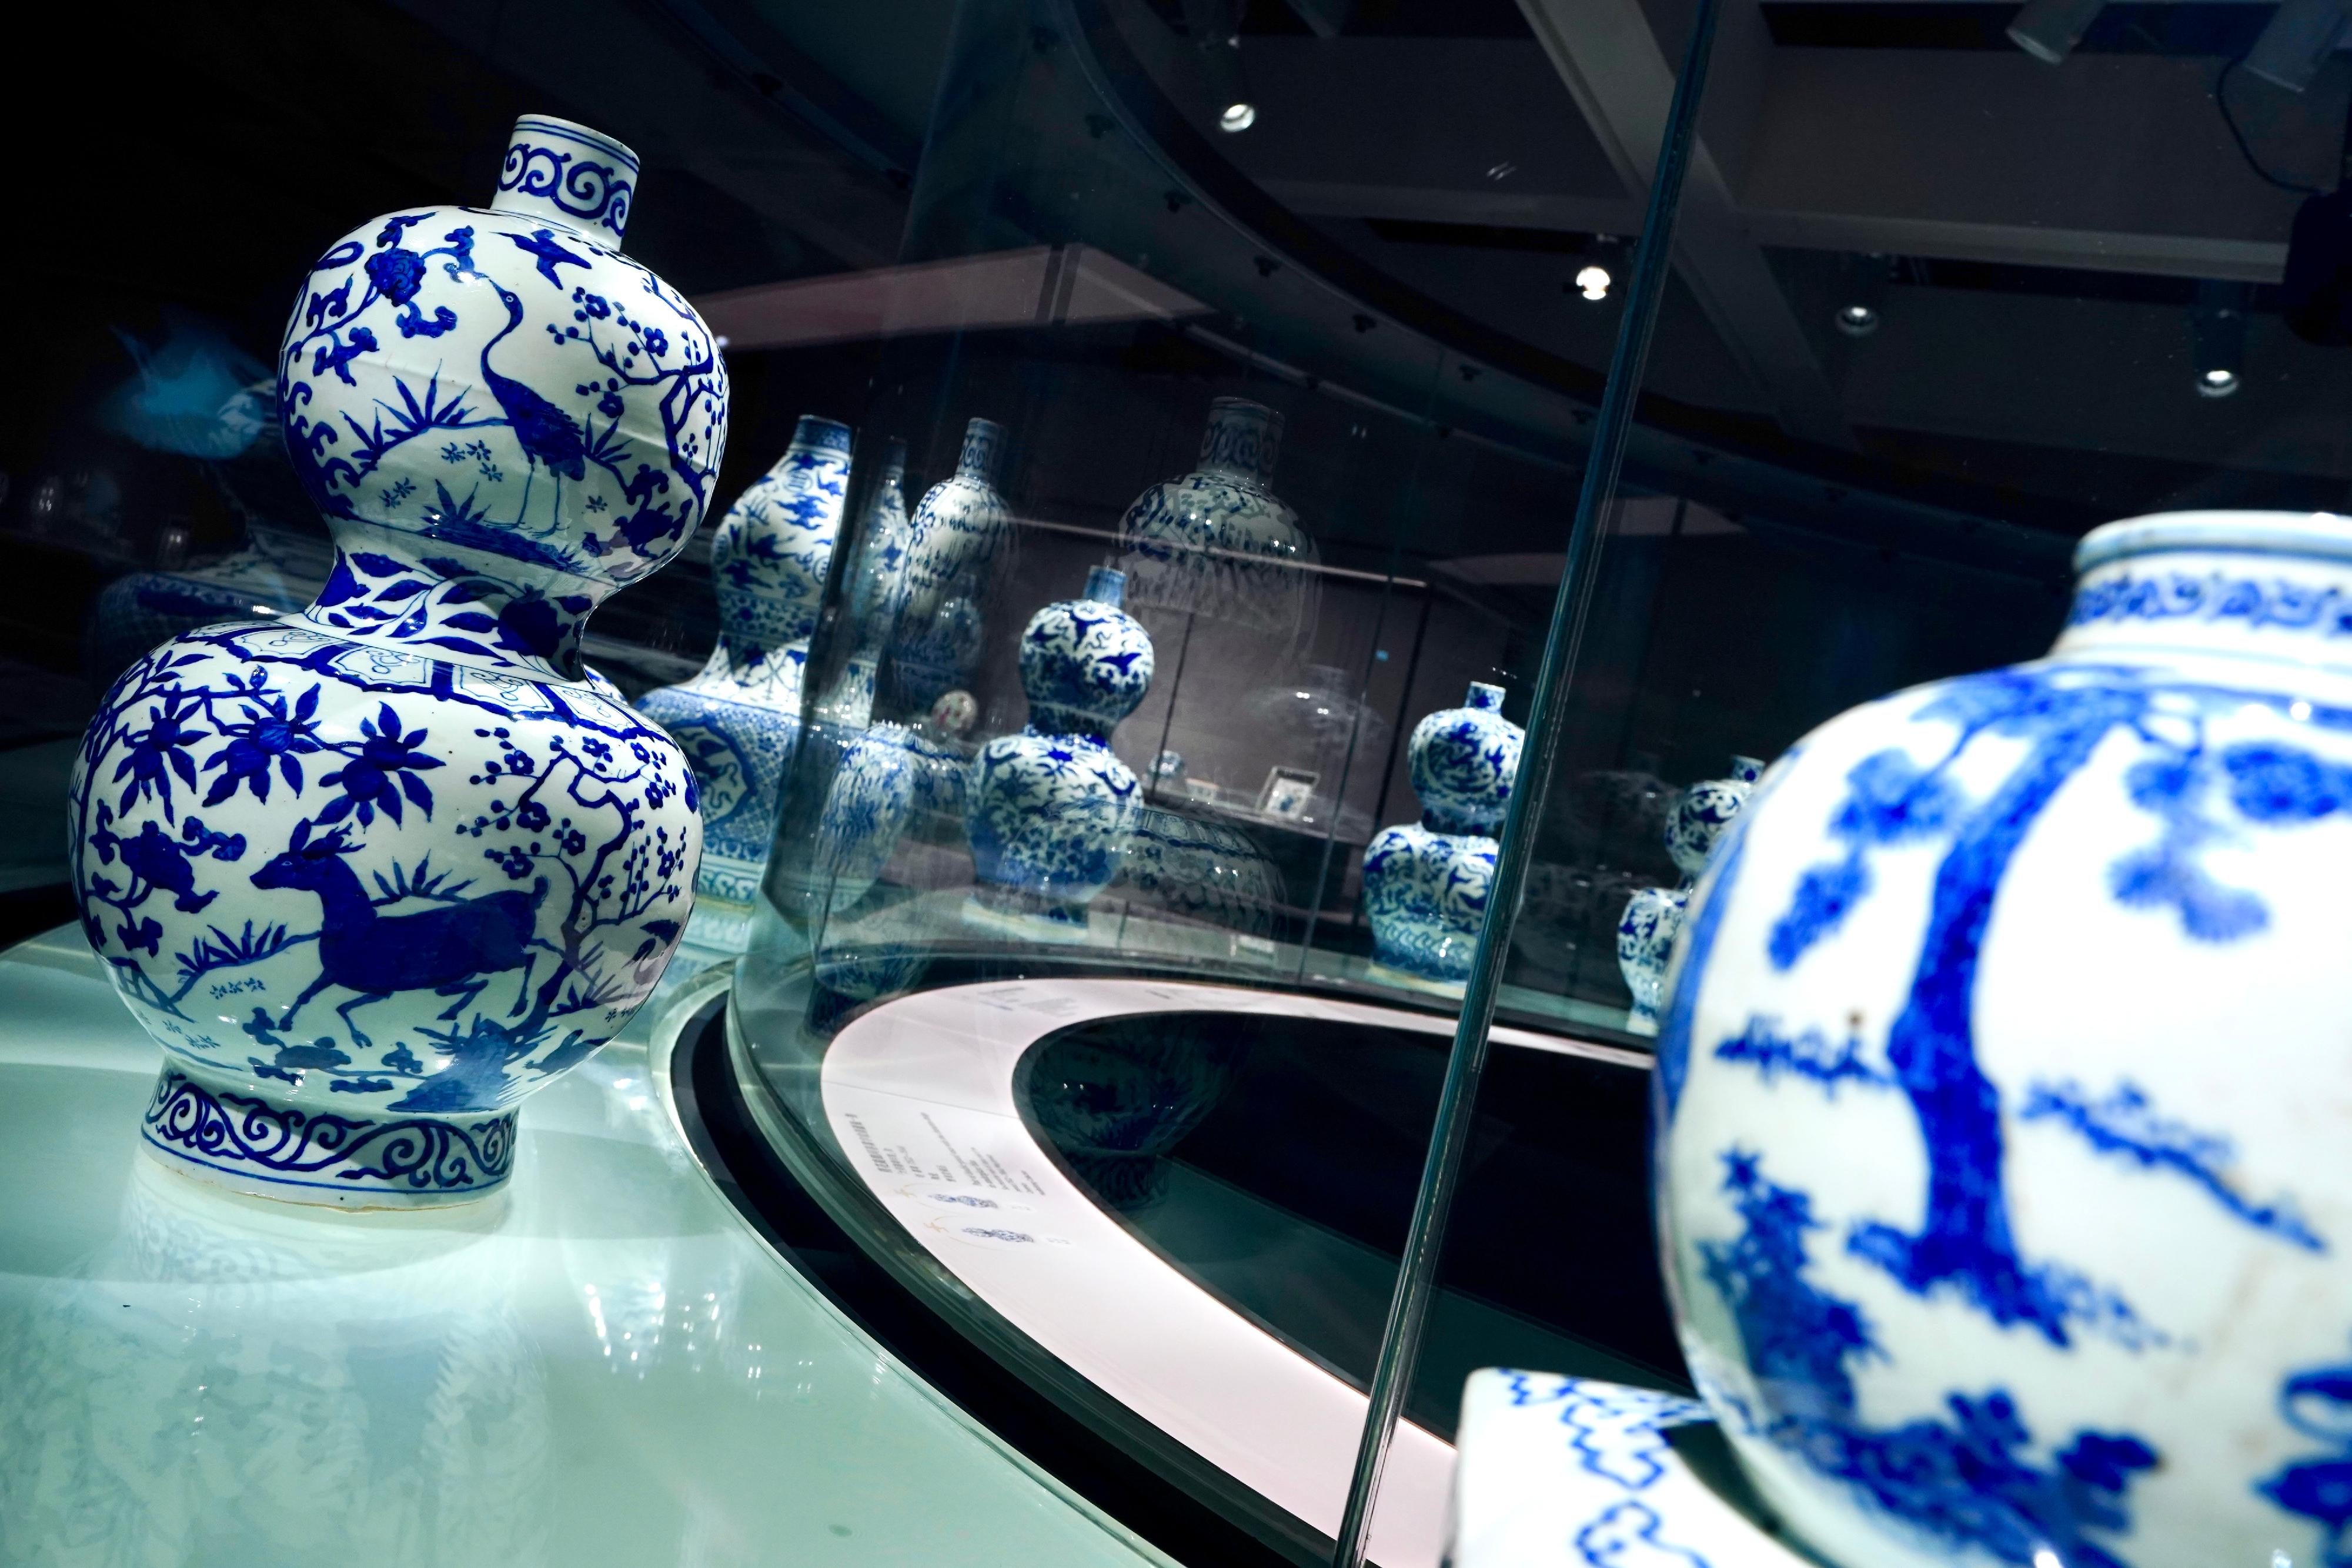 The Hong Kong Museum of Art has launched a new exhibition, "Eternal Enlightenment: the Virtual World of Jiajing Emperor", displaying 240 precious exhibits of the Jiajing period from the Huaihaitang collection of prestigious local collector Mr Anthony Cheung. Photo shows a series of underglazed blue double-gourd vases.